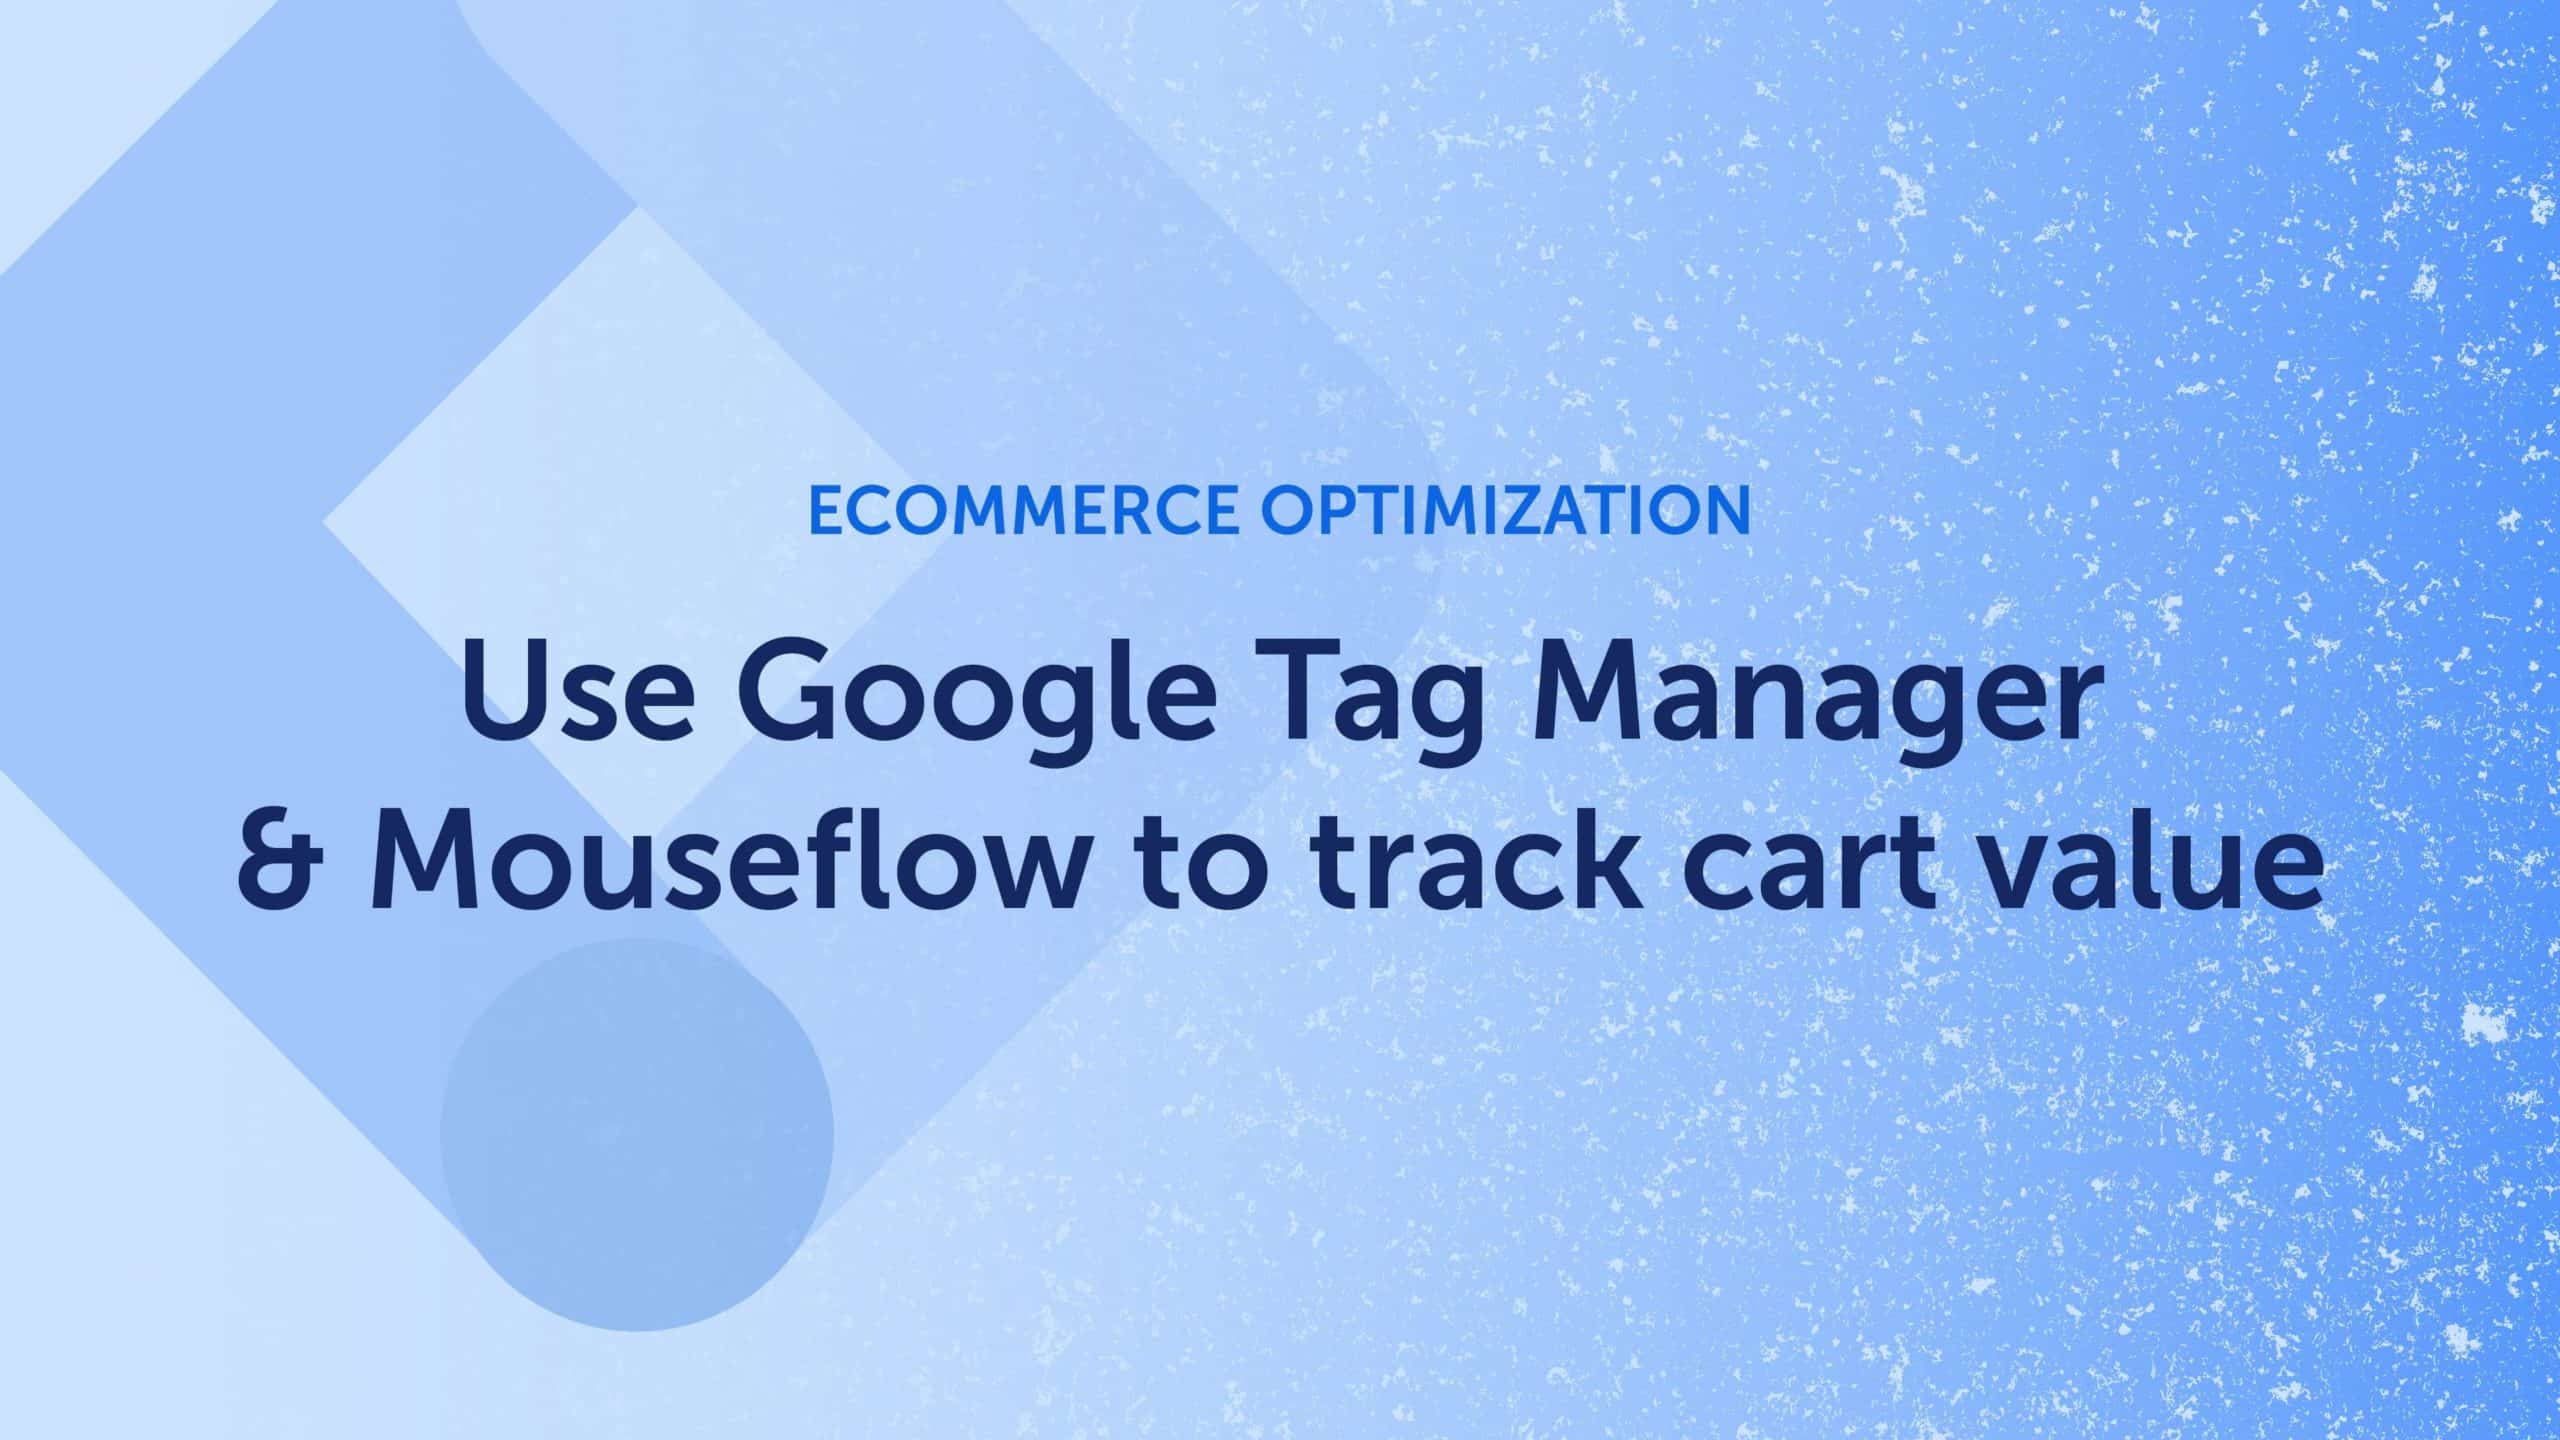 Graphic with blog title "Use Google Tag Manager & Mouseflow to track cart value"